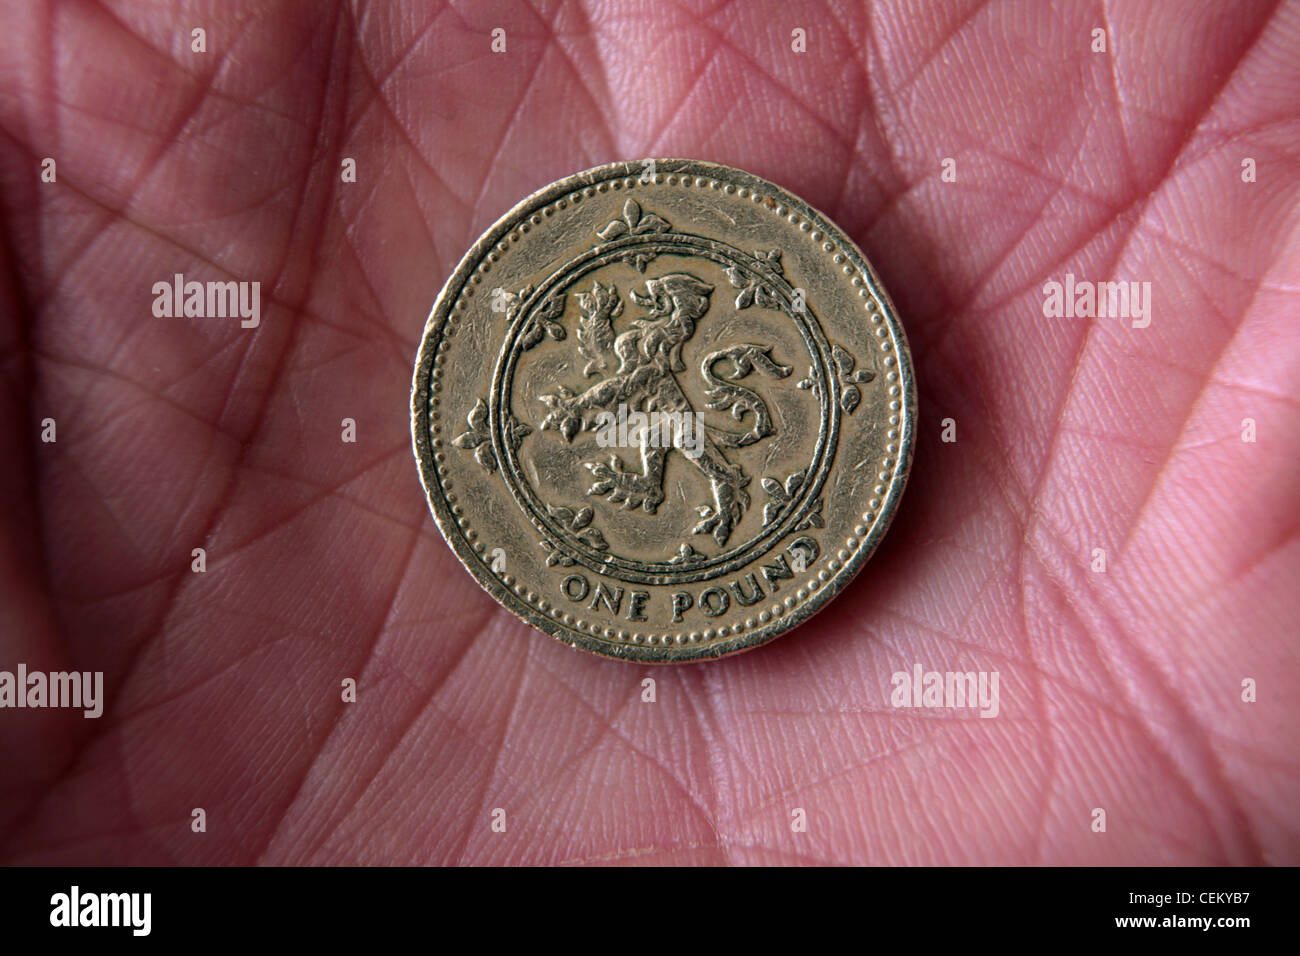 UK pound coin in the palm of a hand. Stock Photo